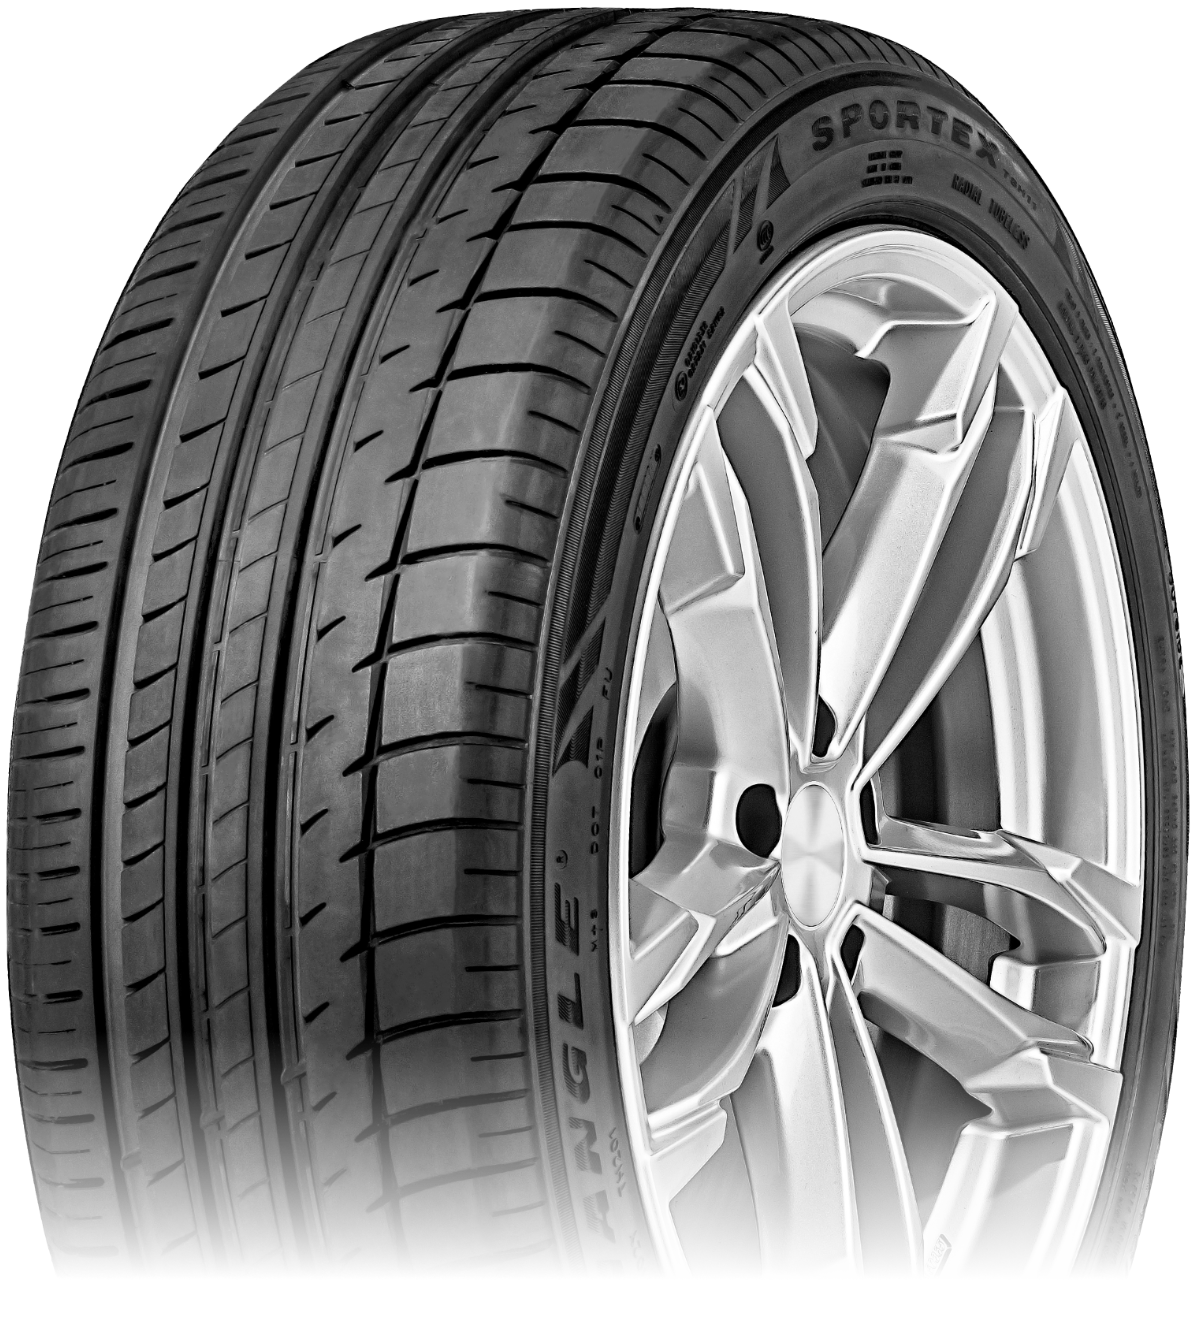 Triangle Sportex TH201 size-245/40R20 load rating- 95 speed rating 